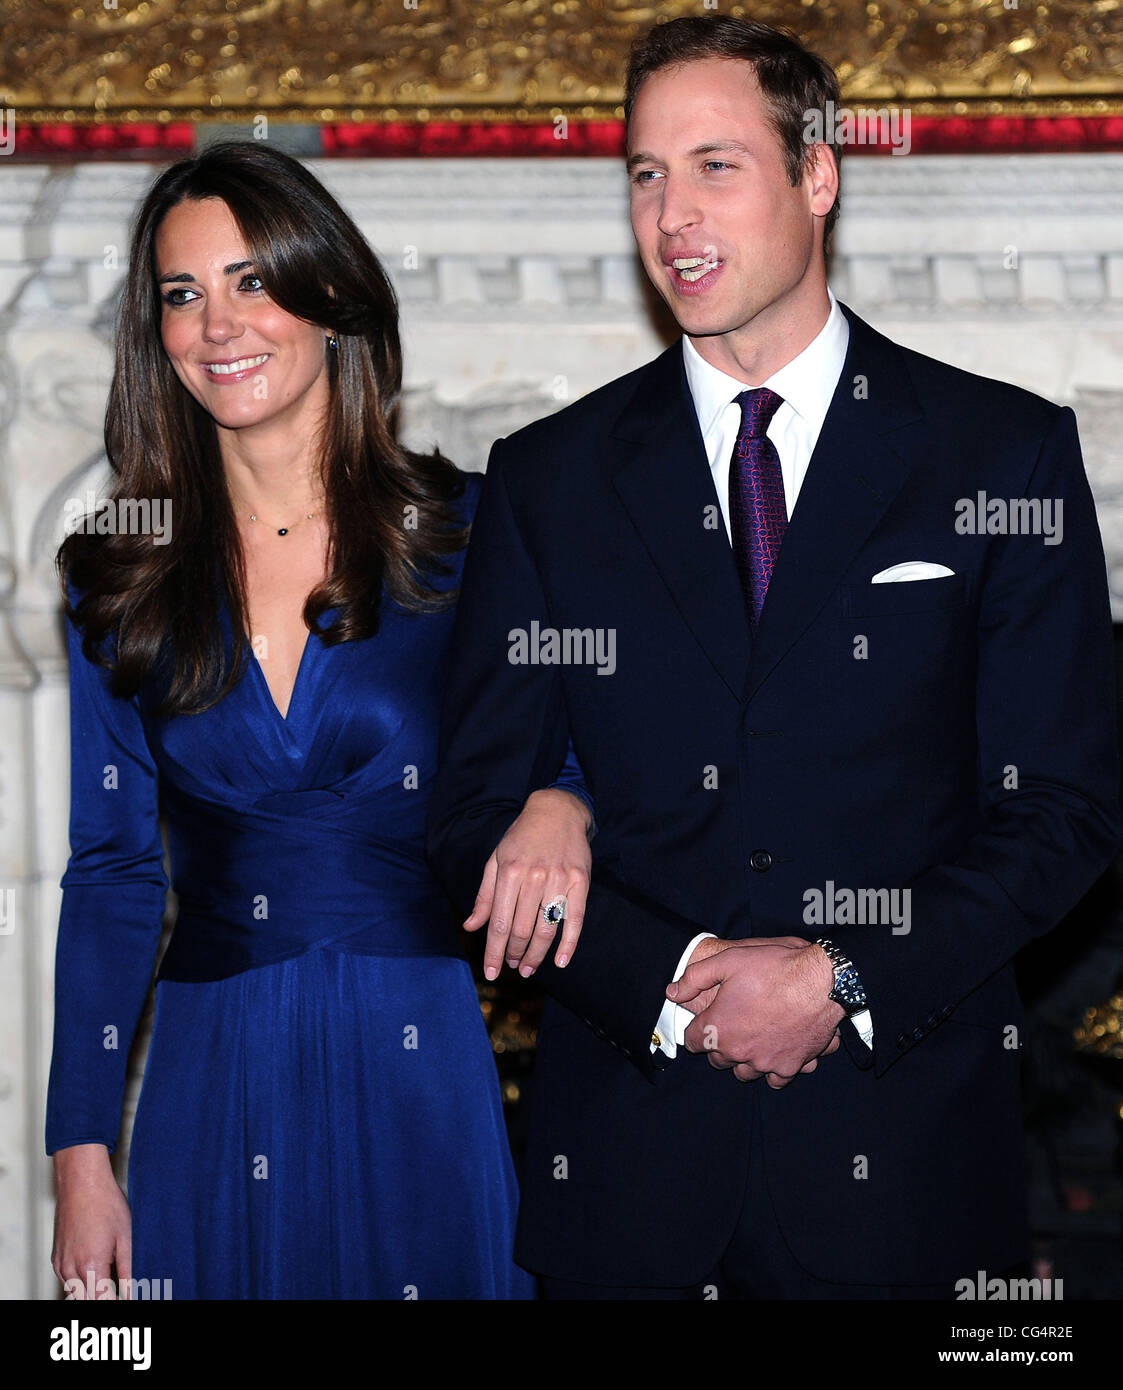 Prince William and Kate Middleton pose for photographs in the State ...